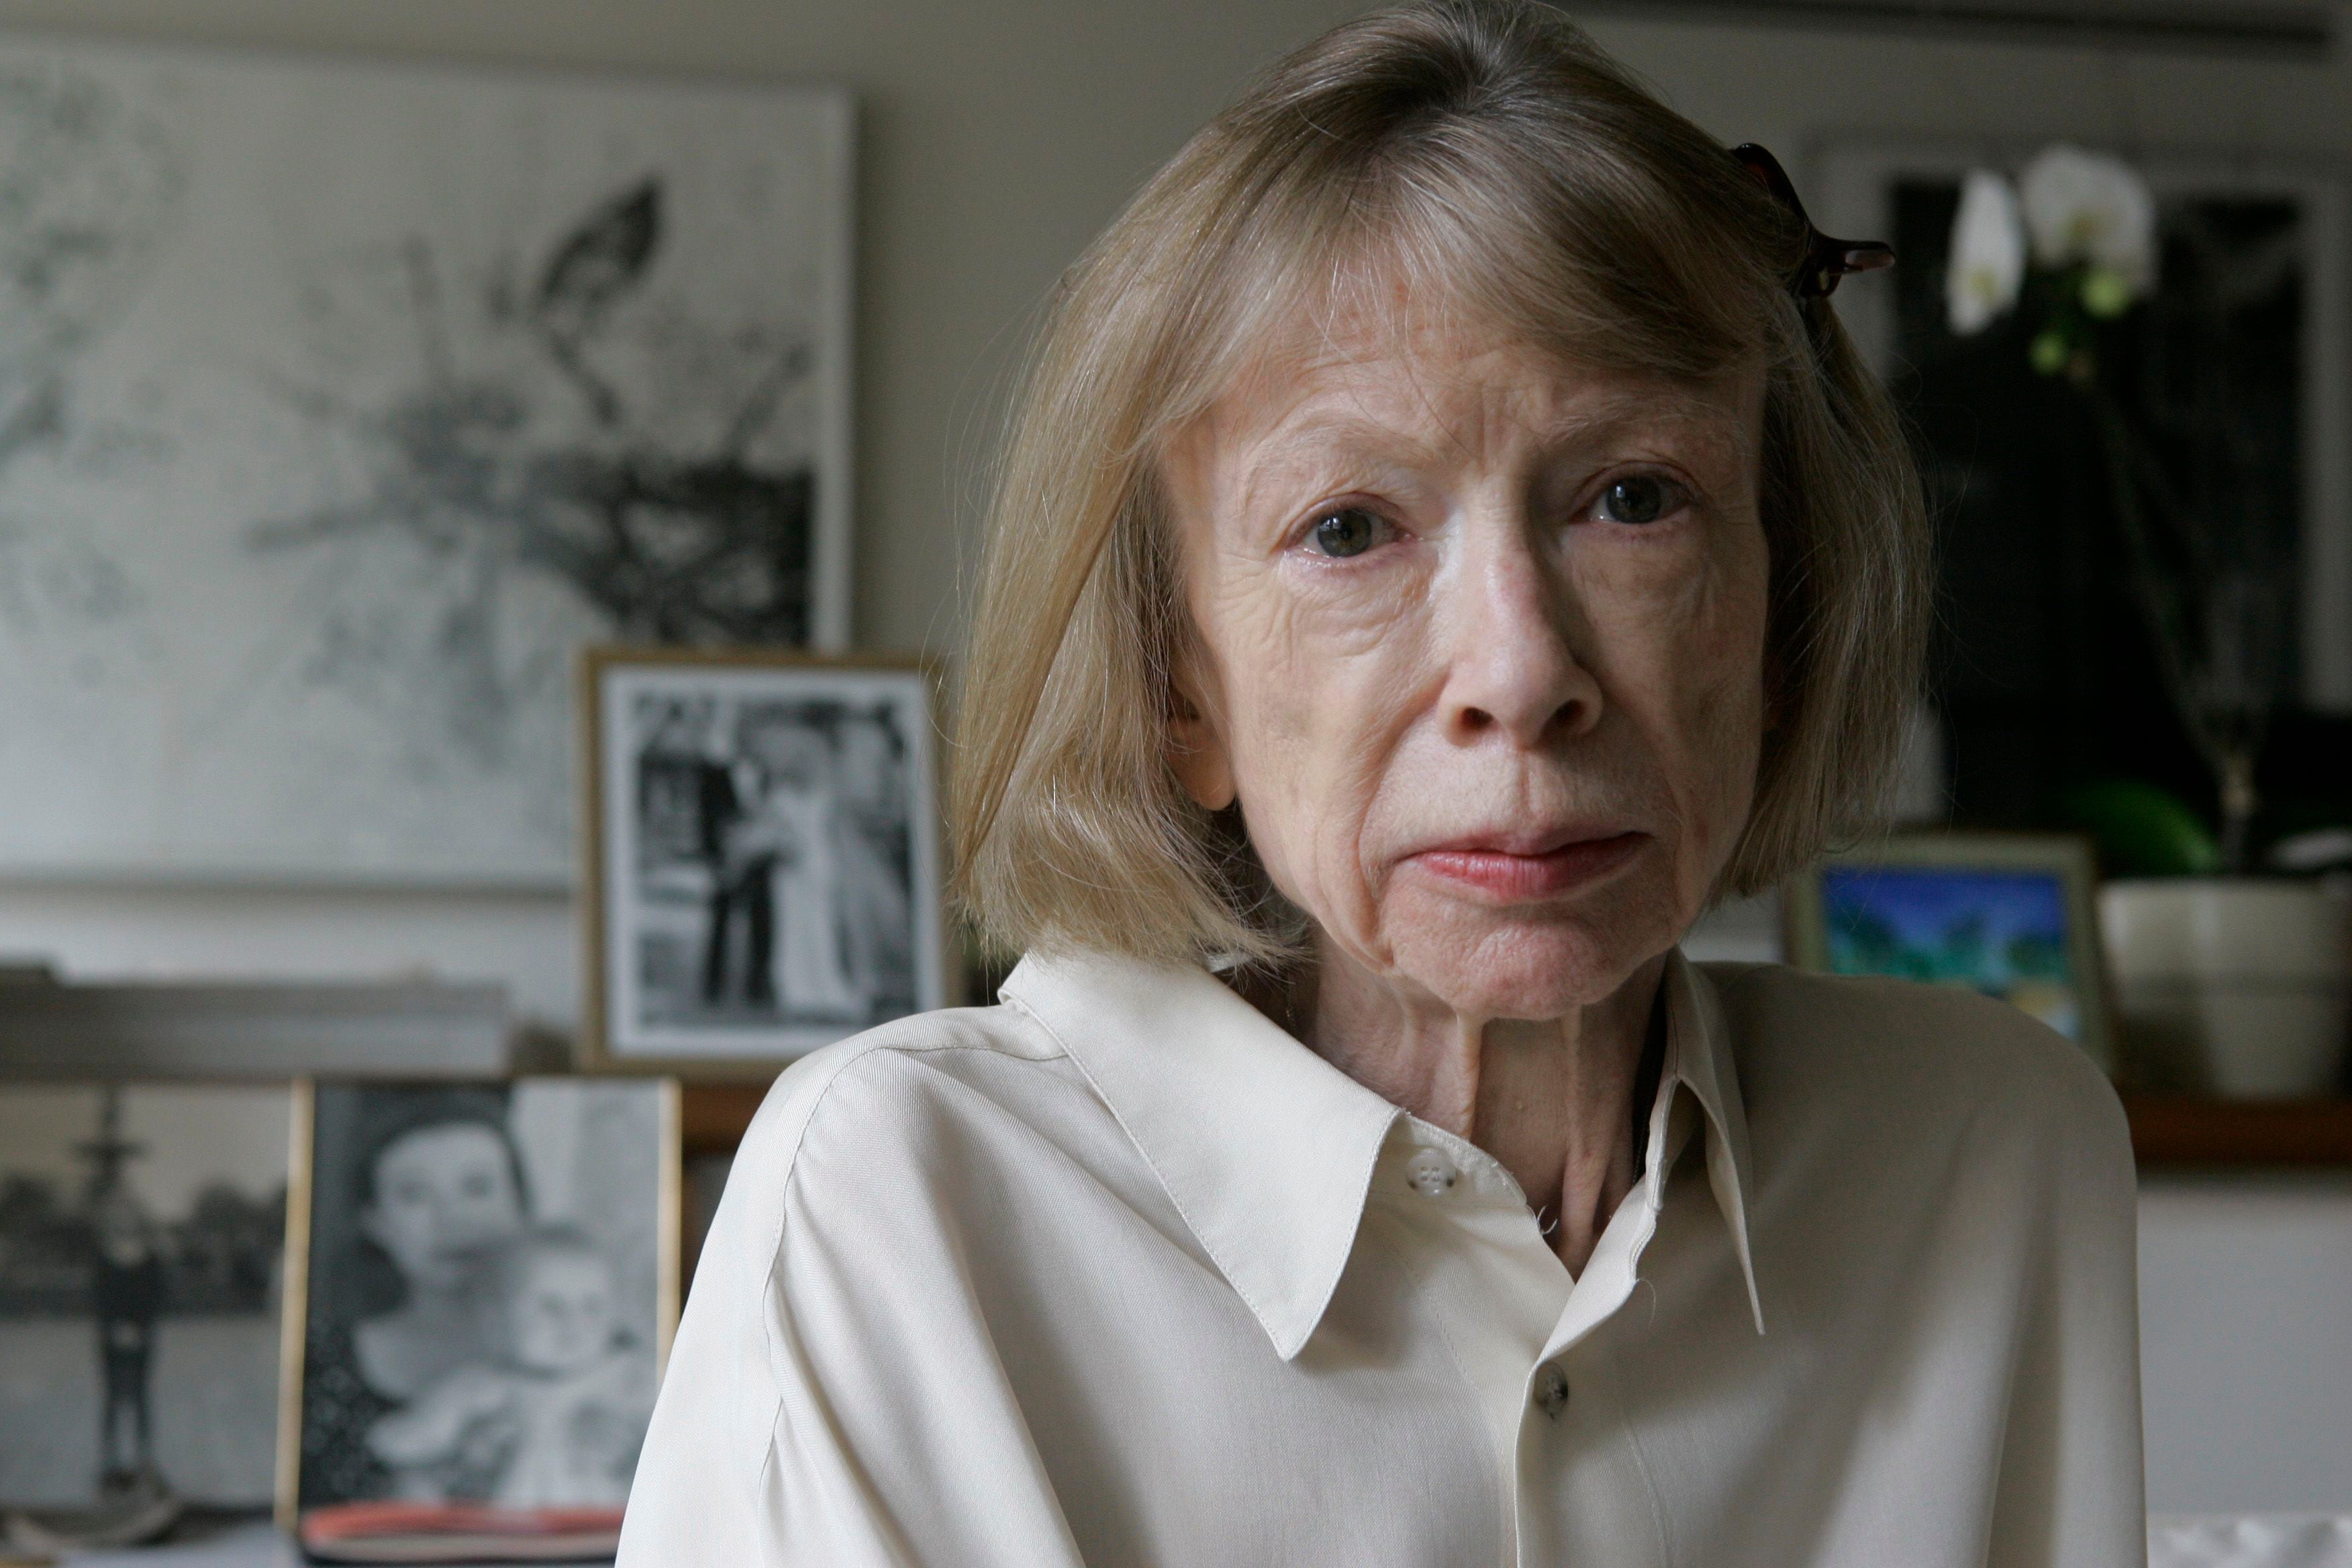 Didion-Dunne archives acquired by New York Public Library